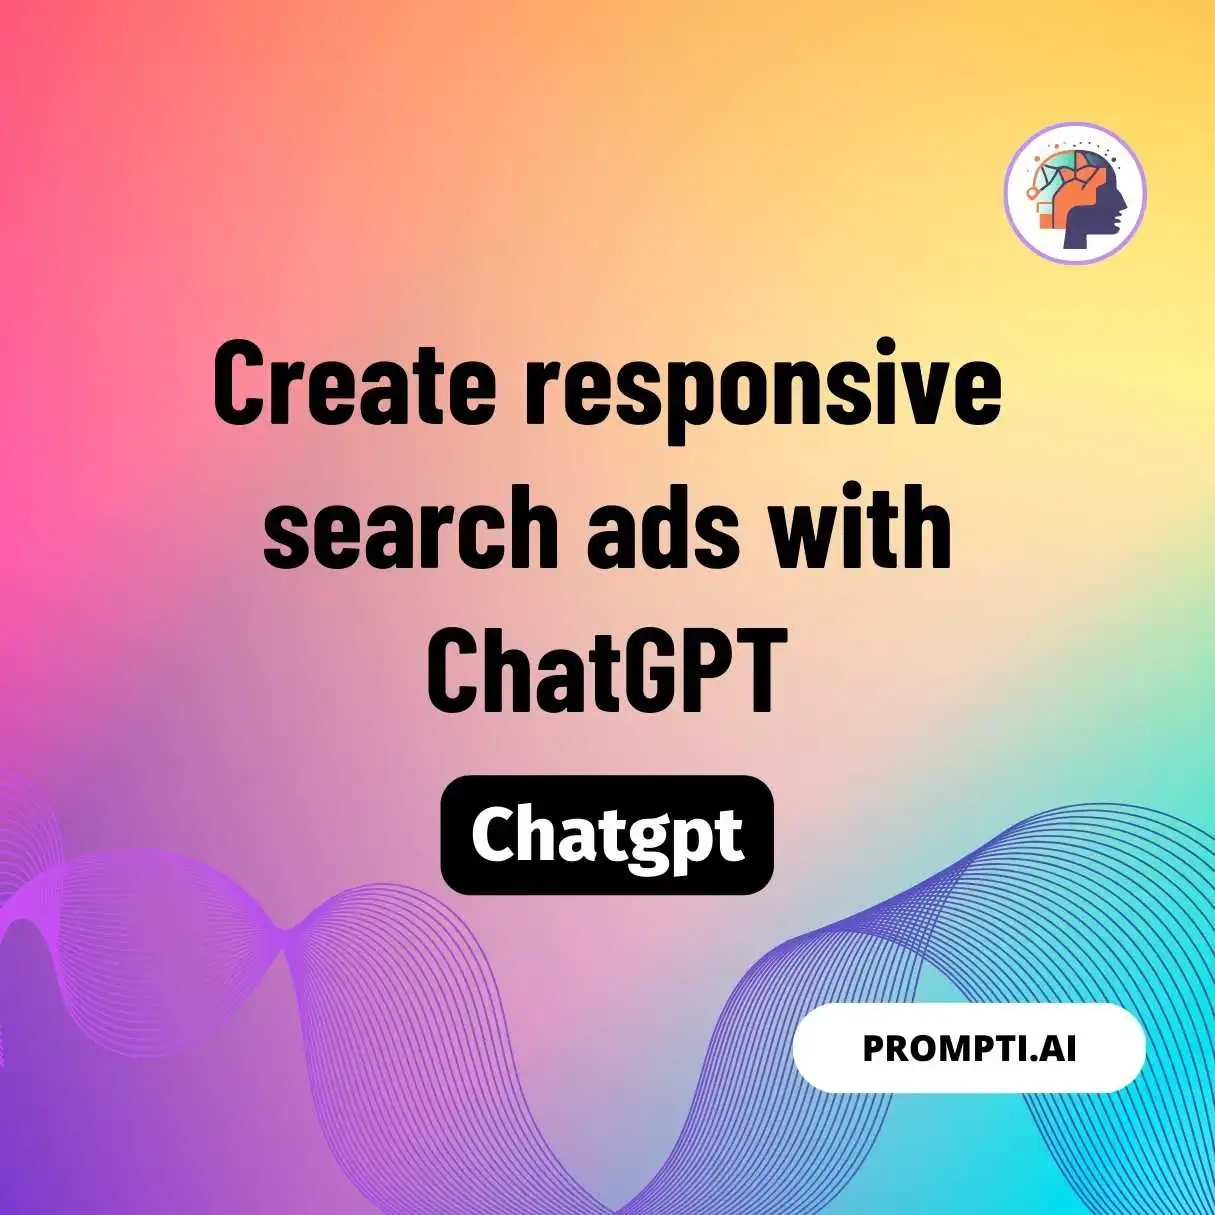 Create responsive search ads with ChatGPT